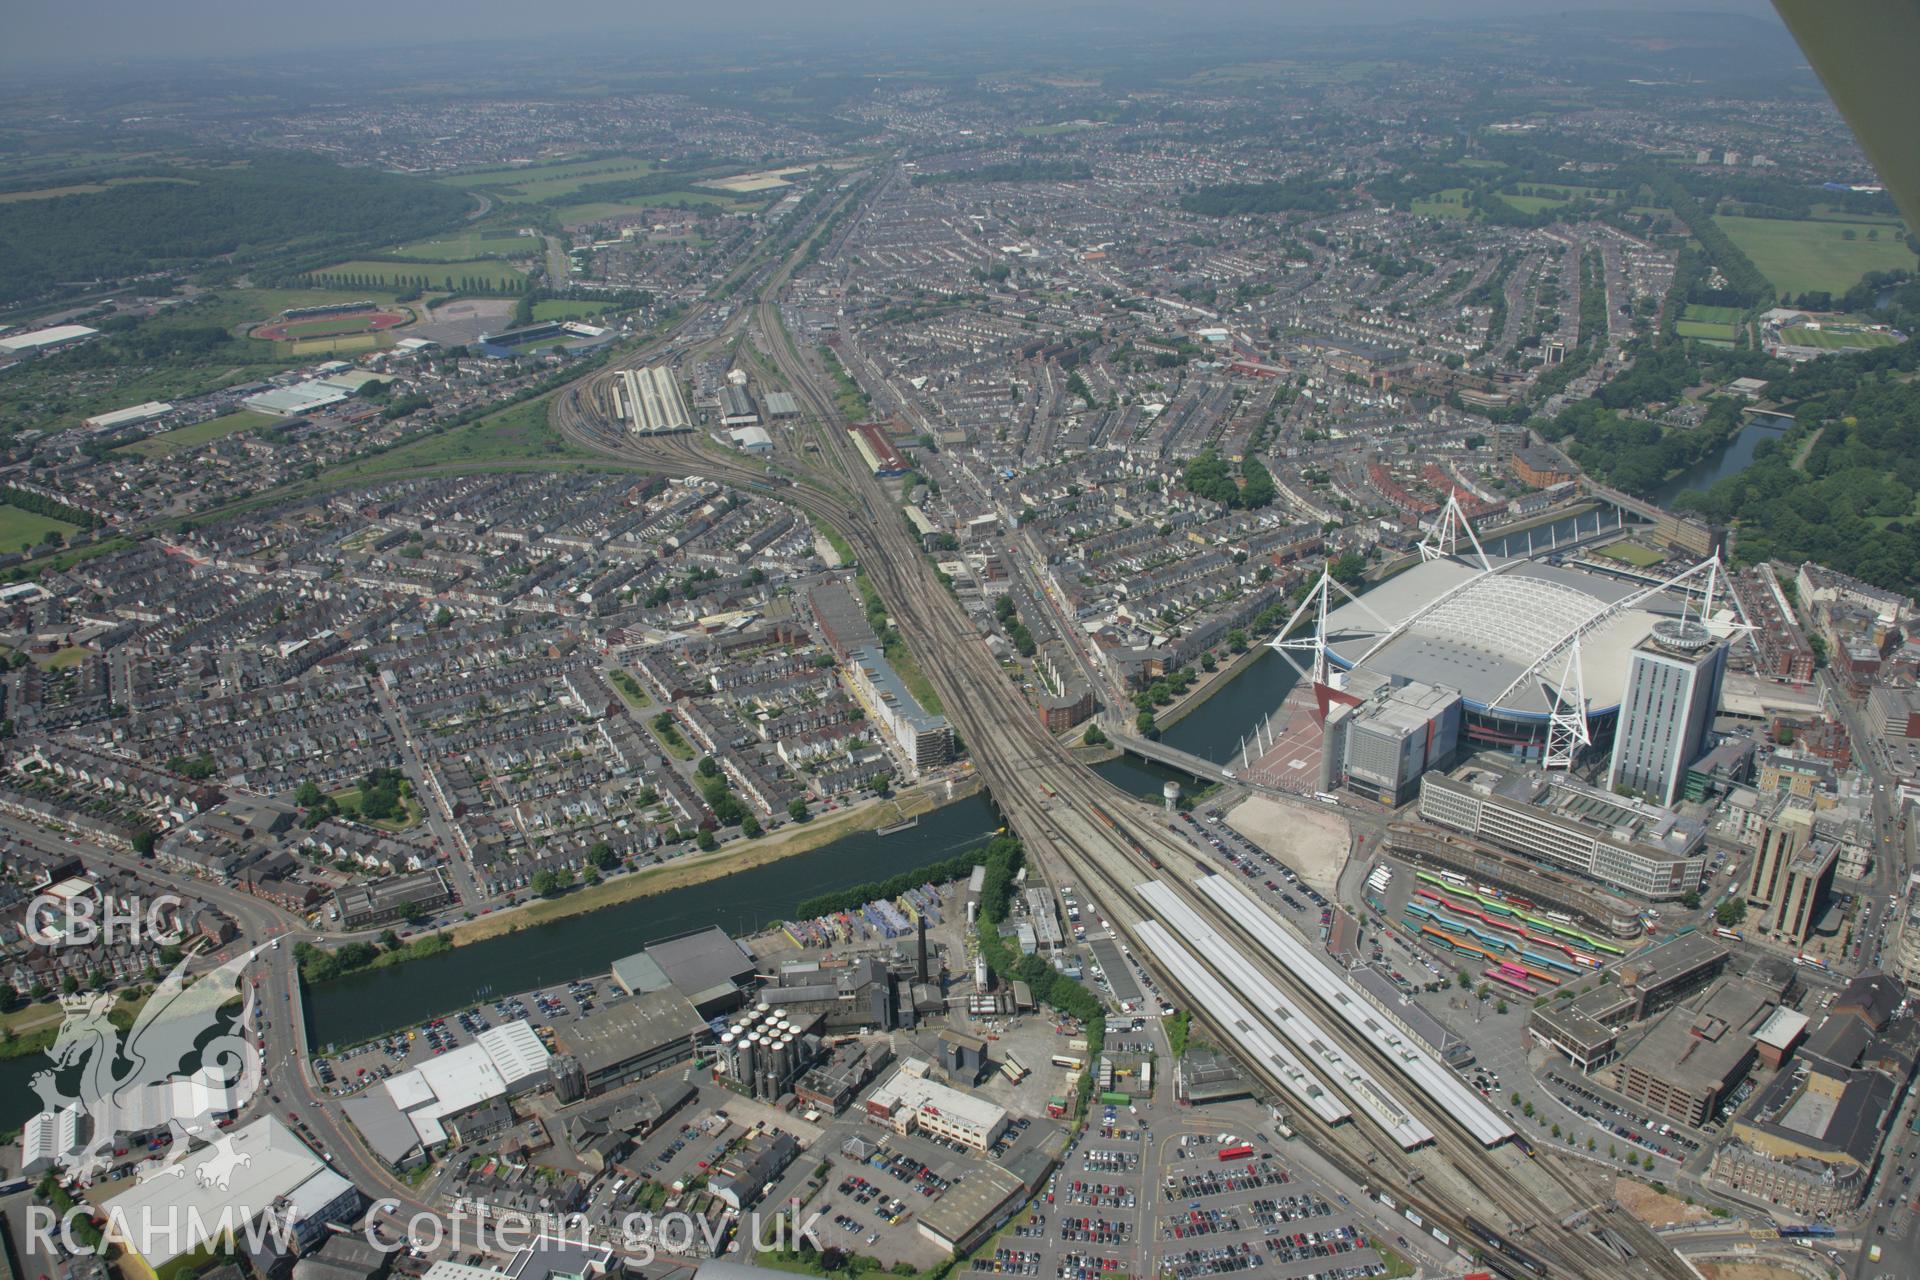 RCAHMW colour oblique photograph of Cardiff city centre and Millennium Stadium. Taken by Toby Driver on 29/06/2006.